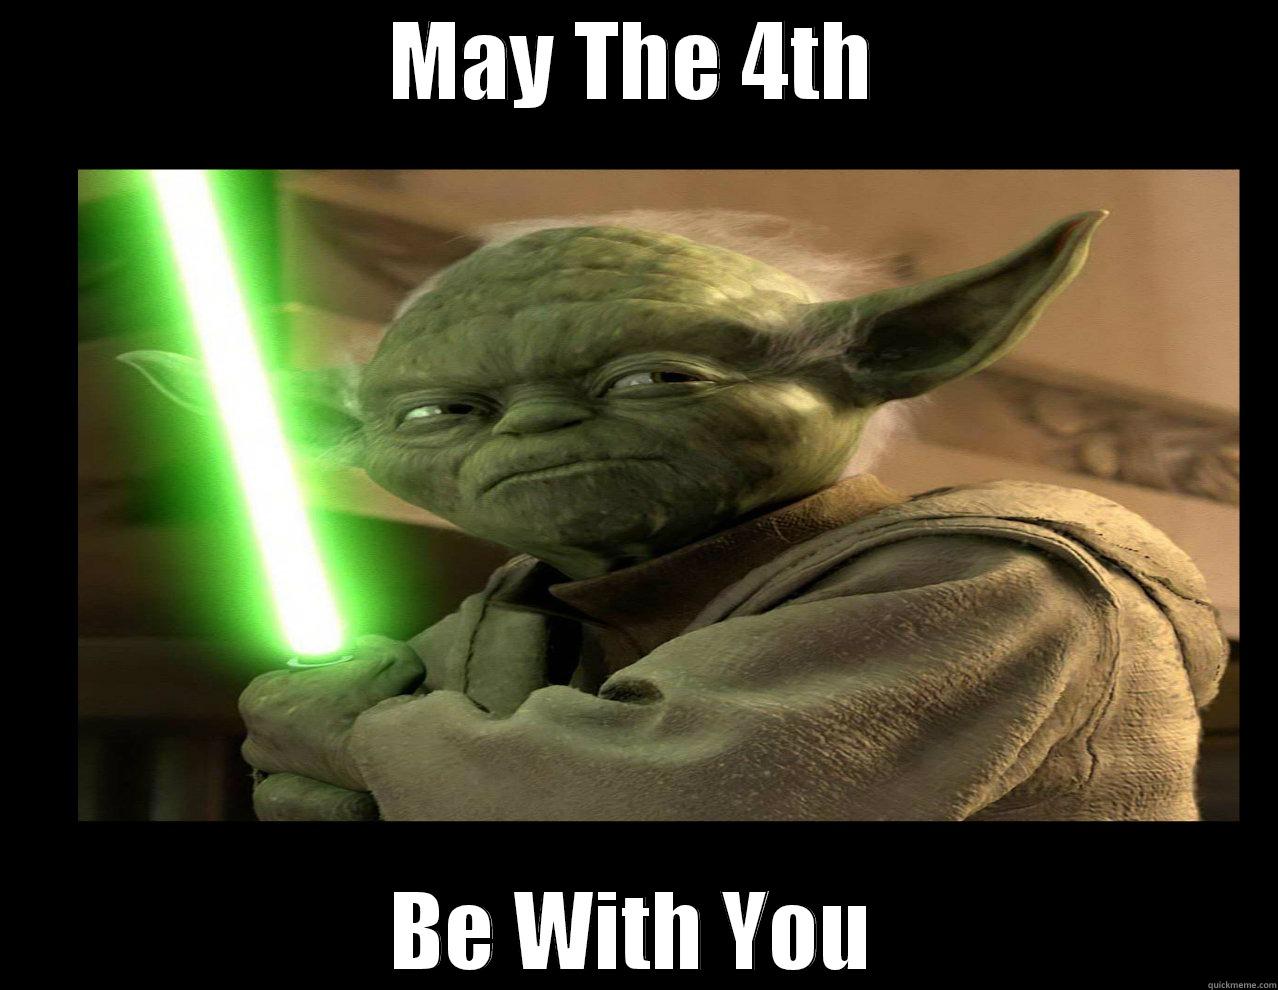 may the 4th be with you - MAY THE 4TH BE WITH YOU Misc